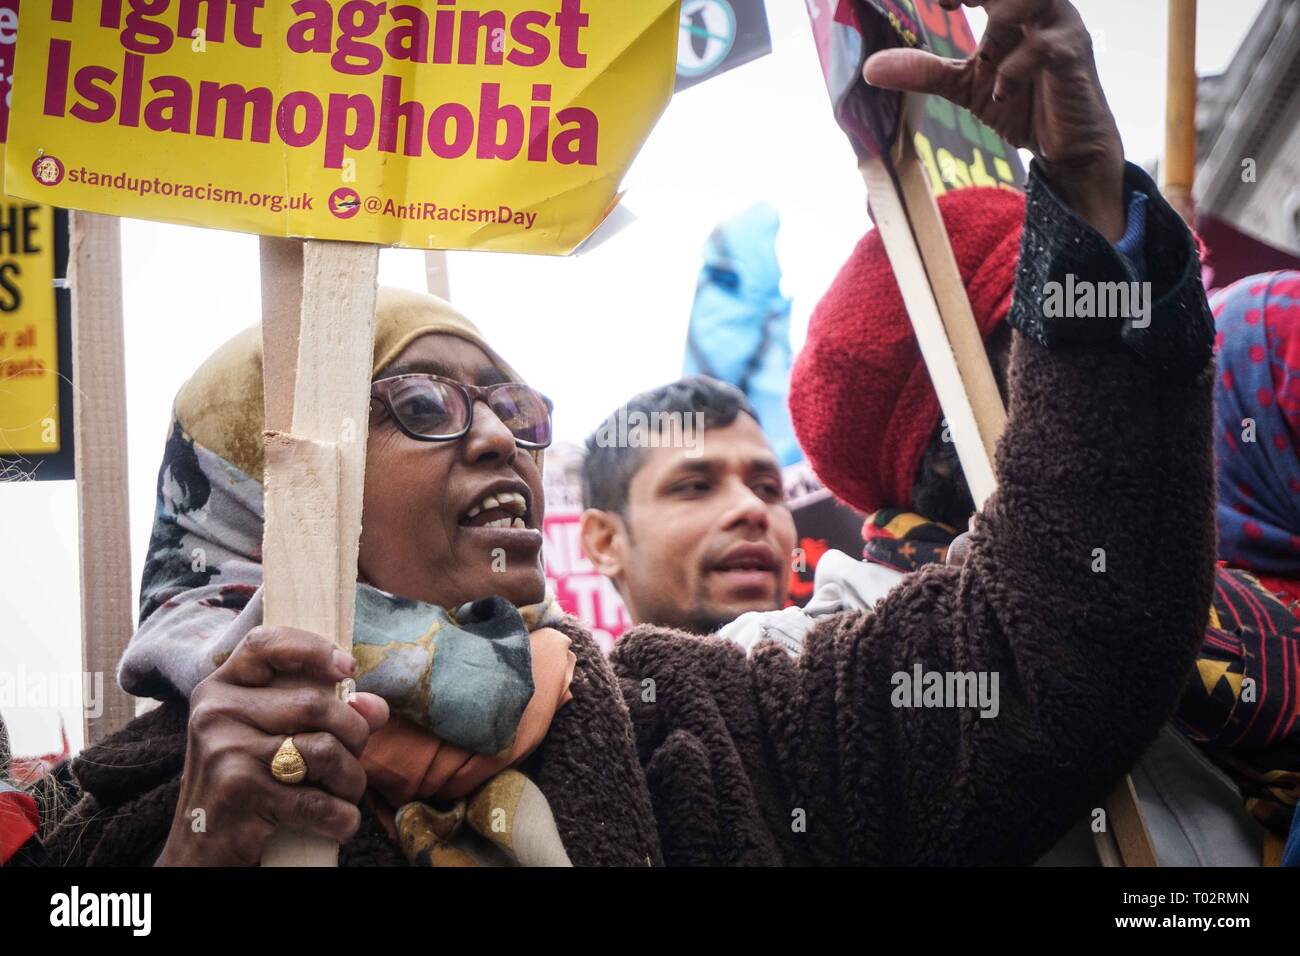 London, UK. 16th March 2019. A protester seen shouting slogans while holding a placard during an anti racist demonstration. Thousands of anti-racists groups took to the streets marking the World against Racism global day of action. Credit: SOPA Images Limited/Alamy Live News Stock Photo